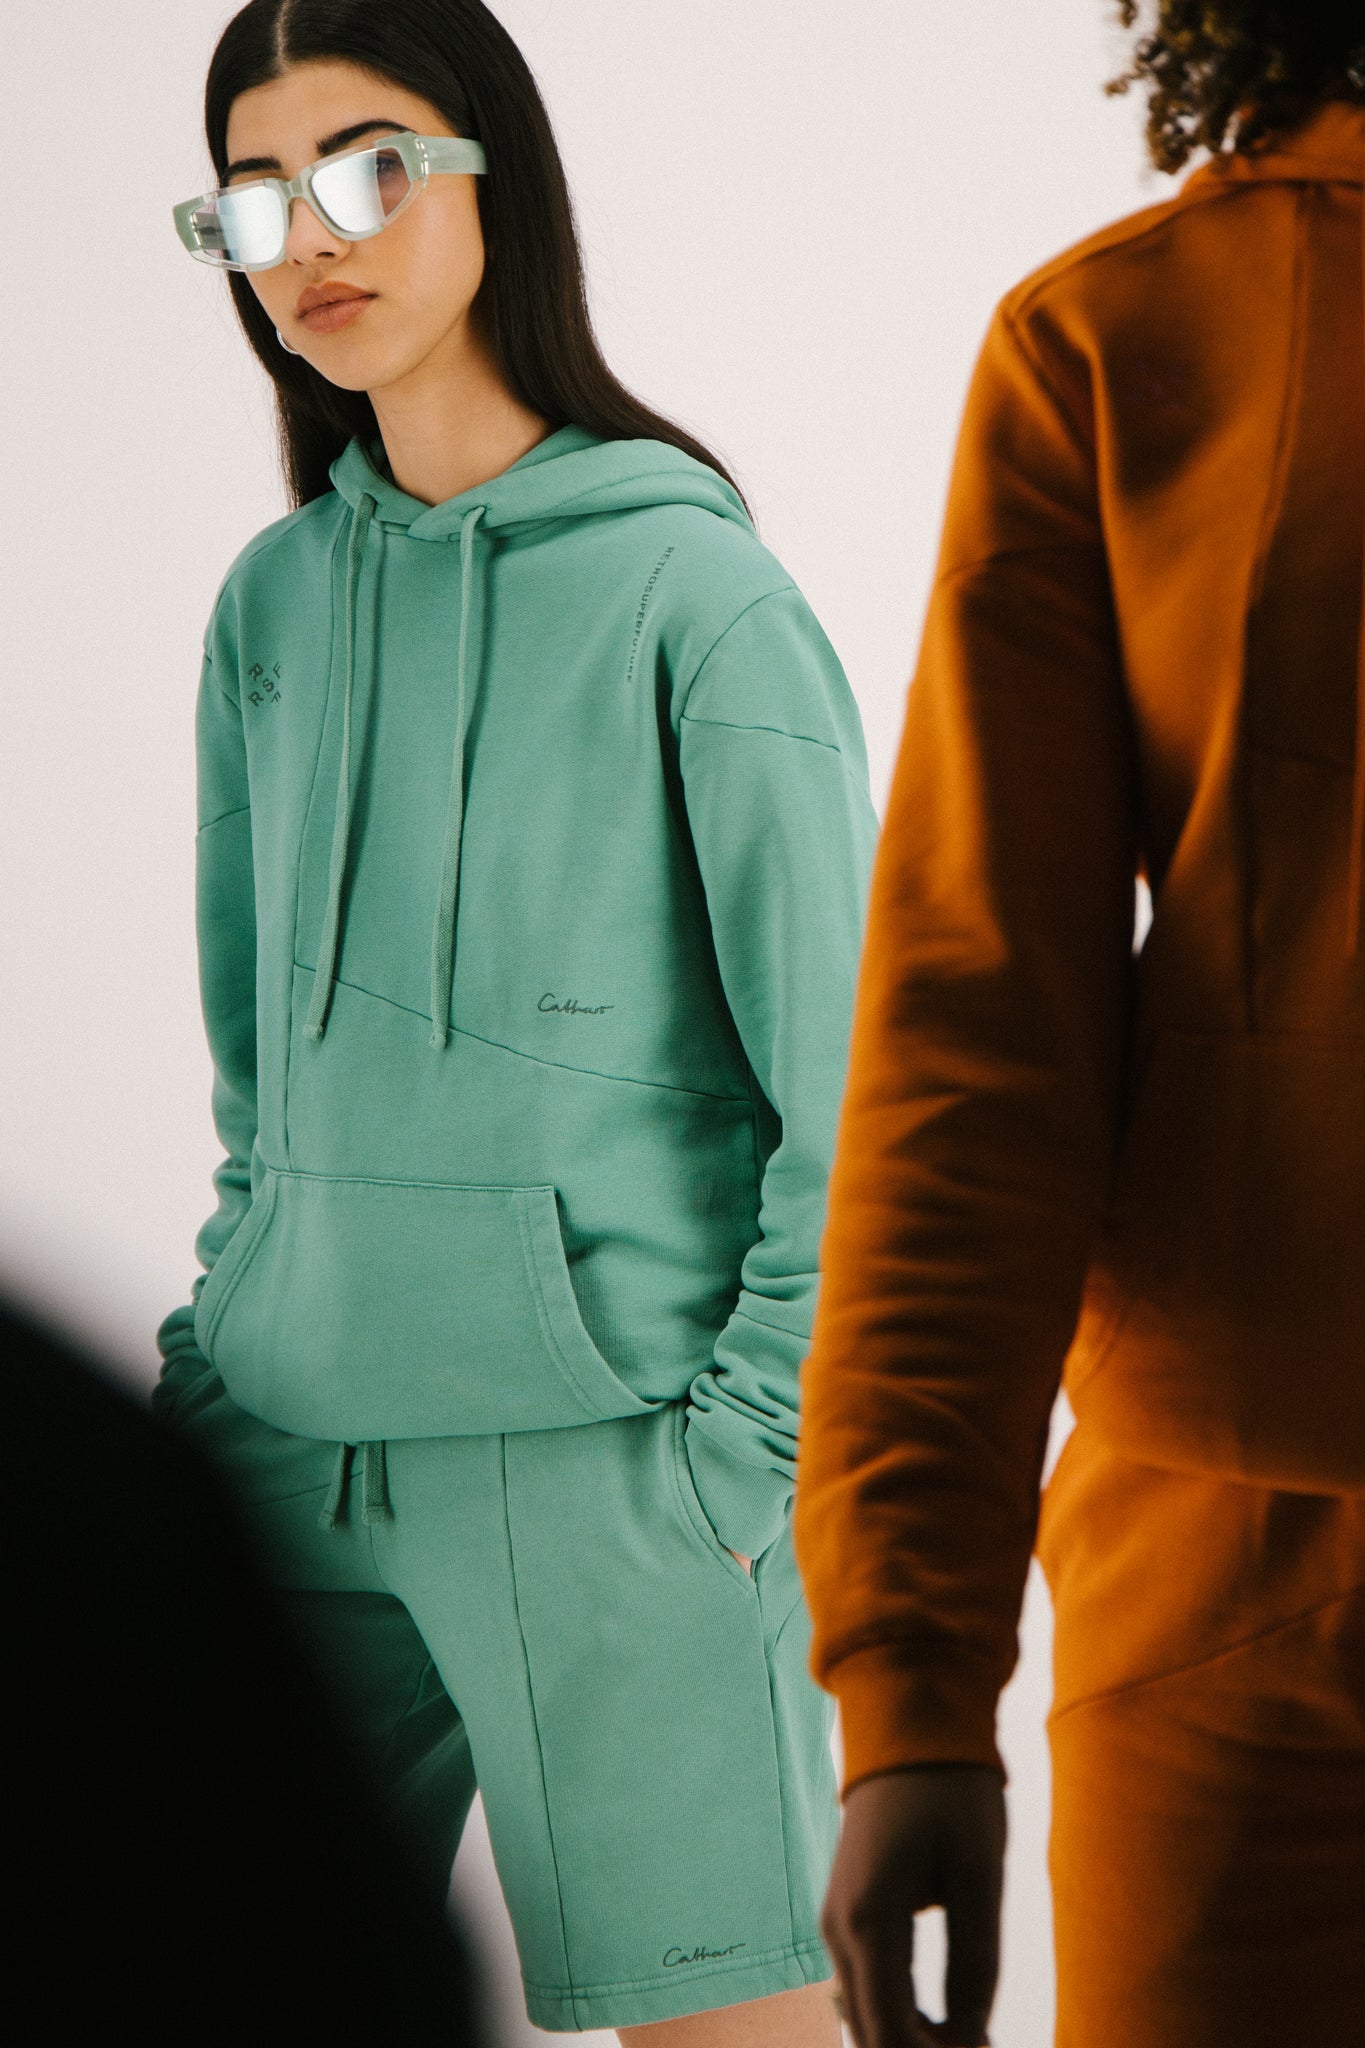 RSF x DC Deconstructed Hoodie Mint - Retrosuperfuture -